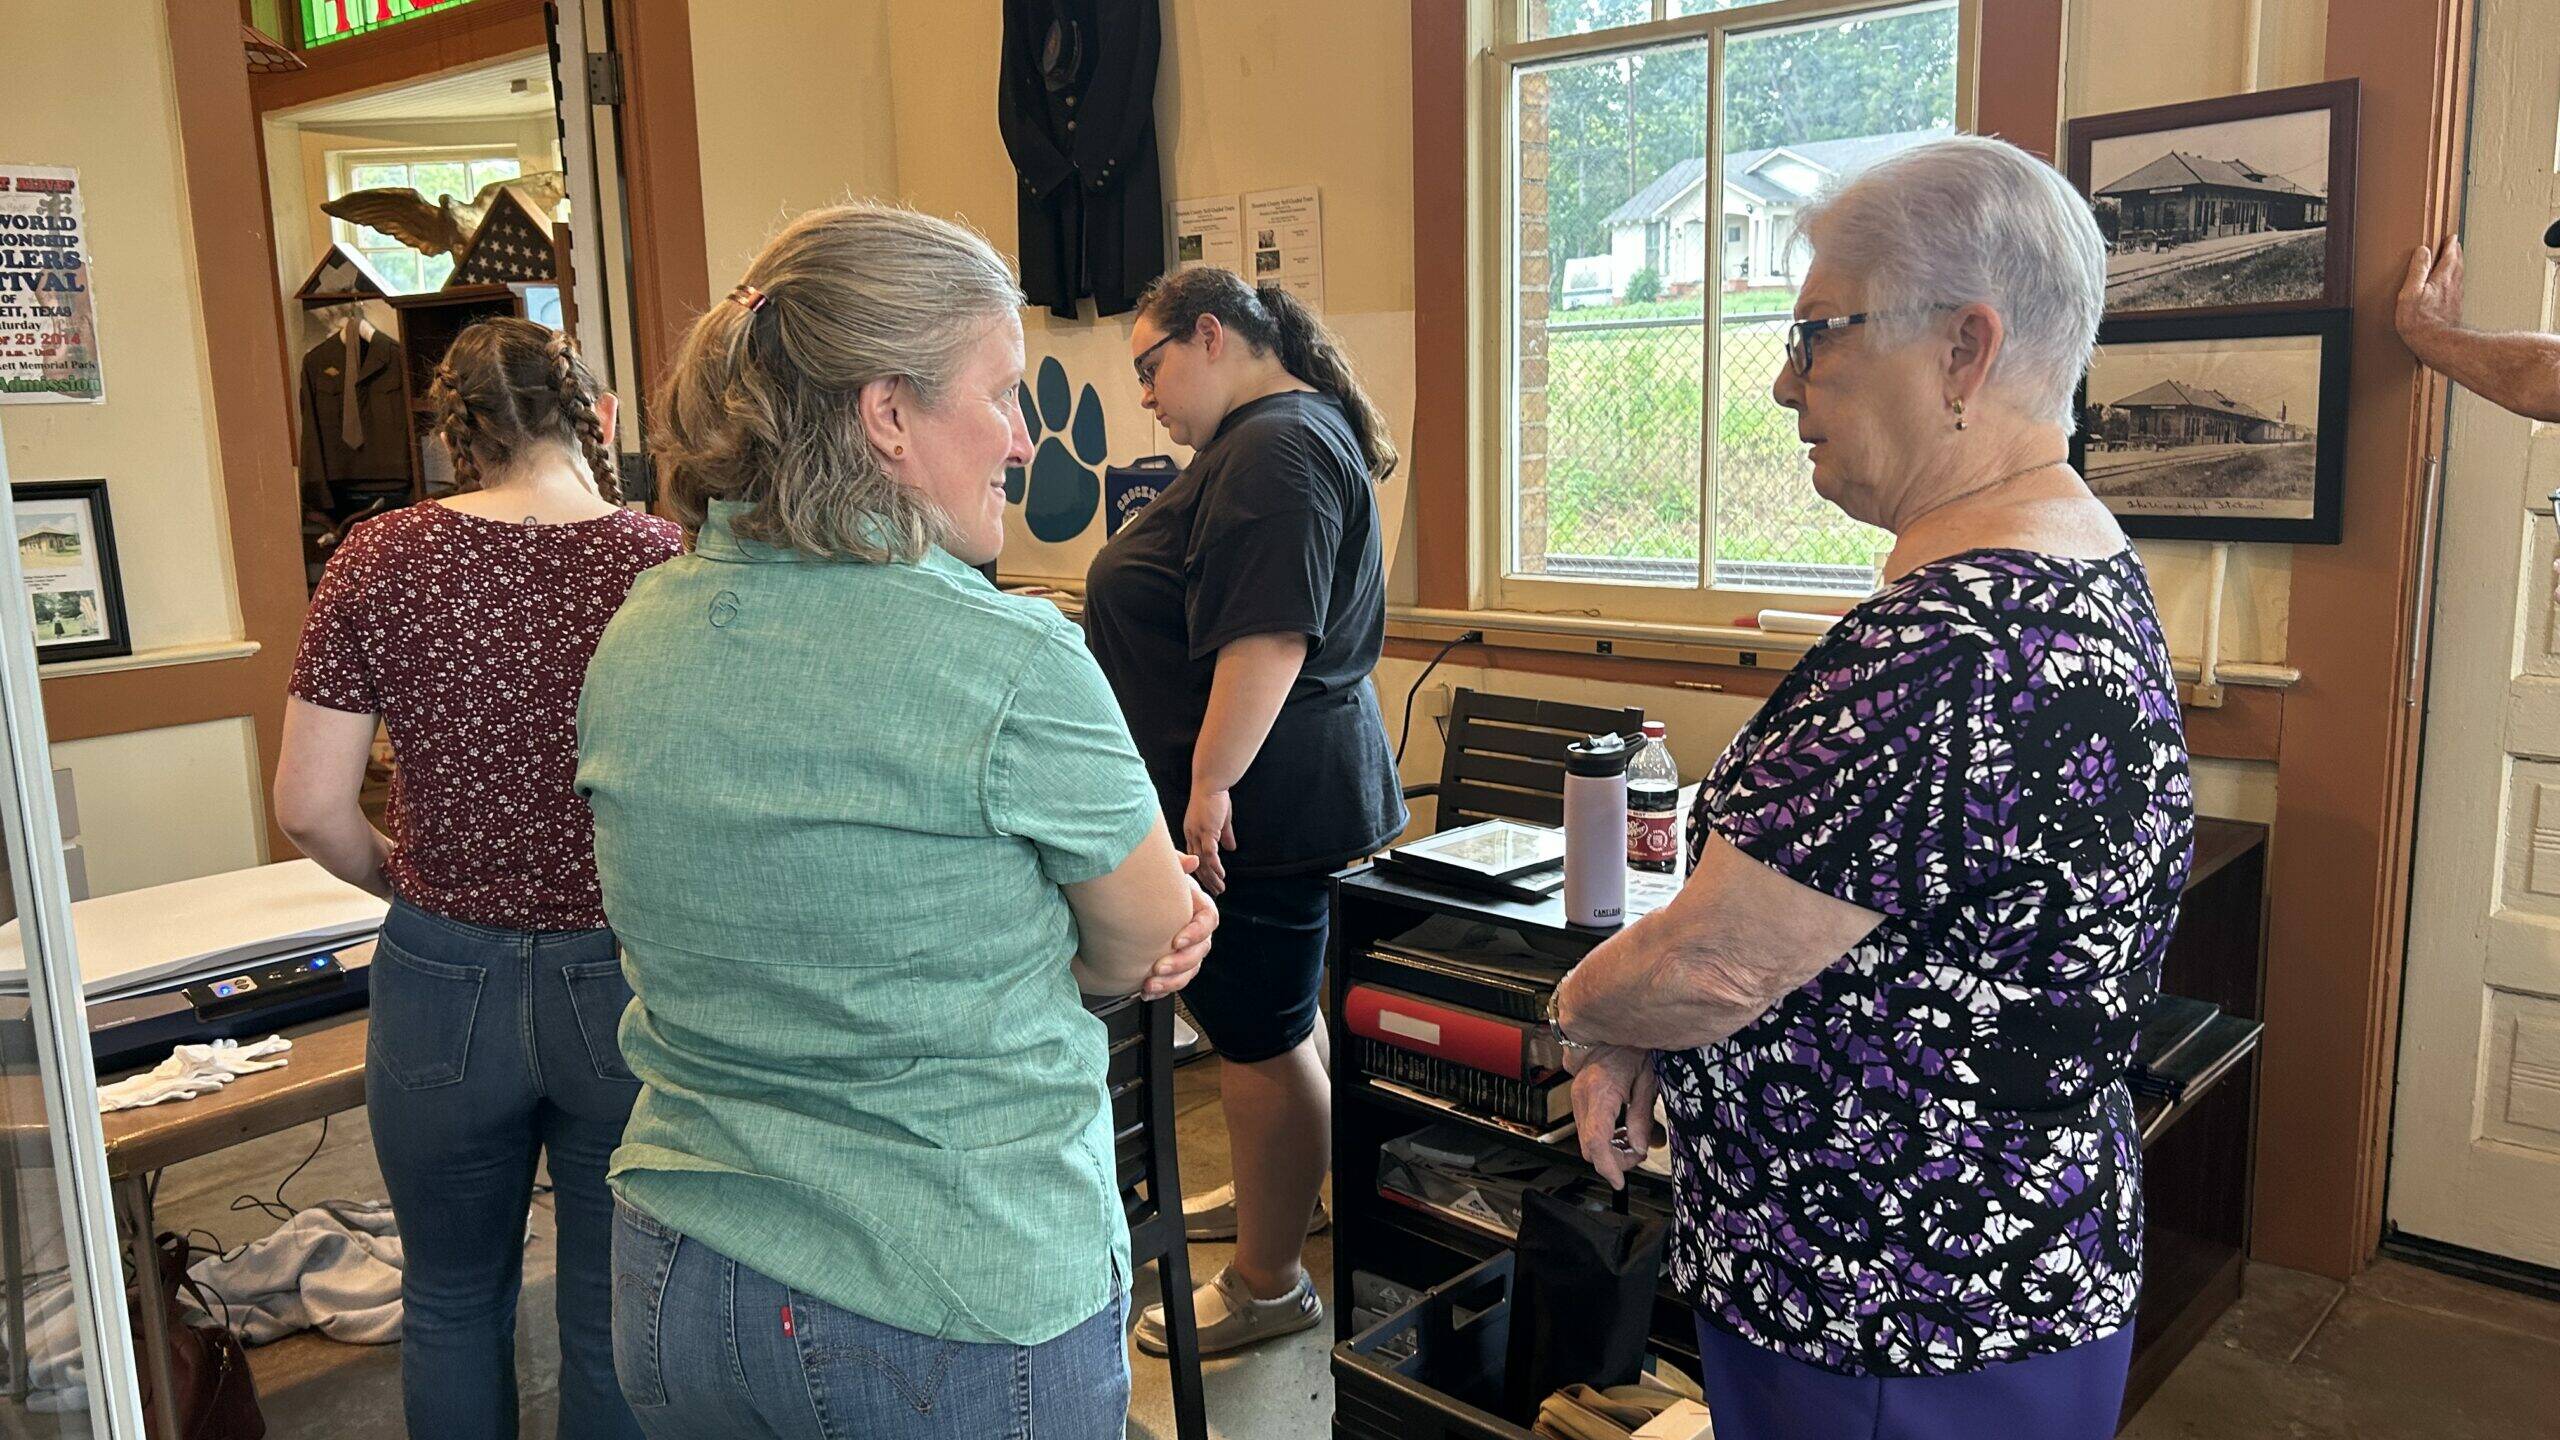 Perky Beisel and Museum Director Dorothy Parker talk while students from Stephen F. Austin digitize items from the museum